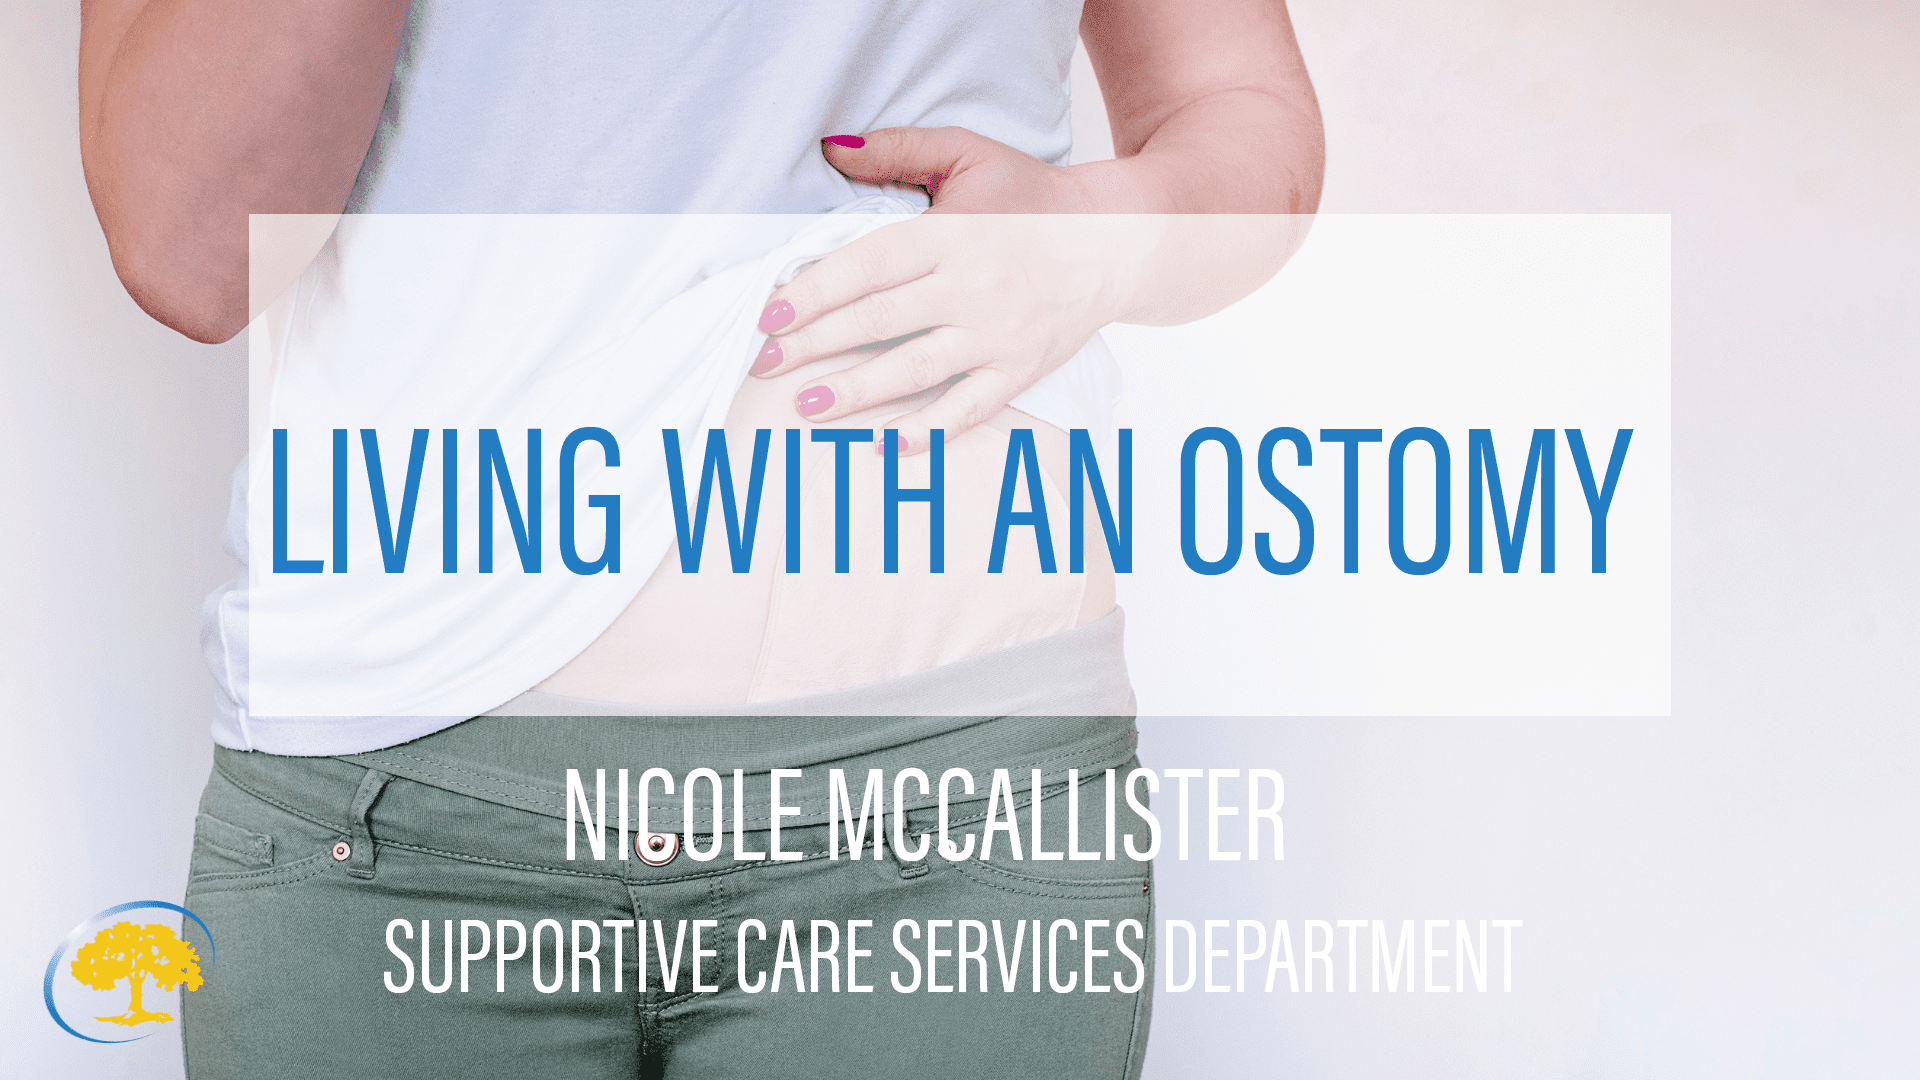 Living with an ostomy